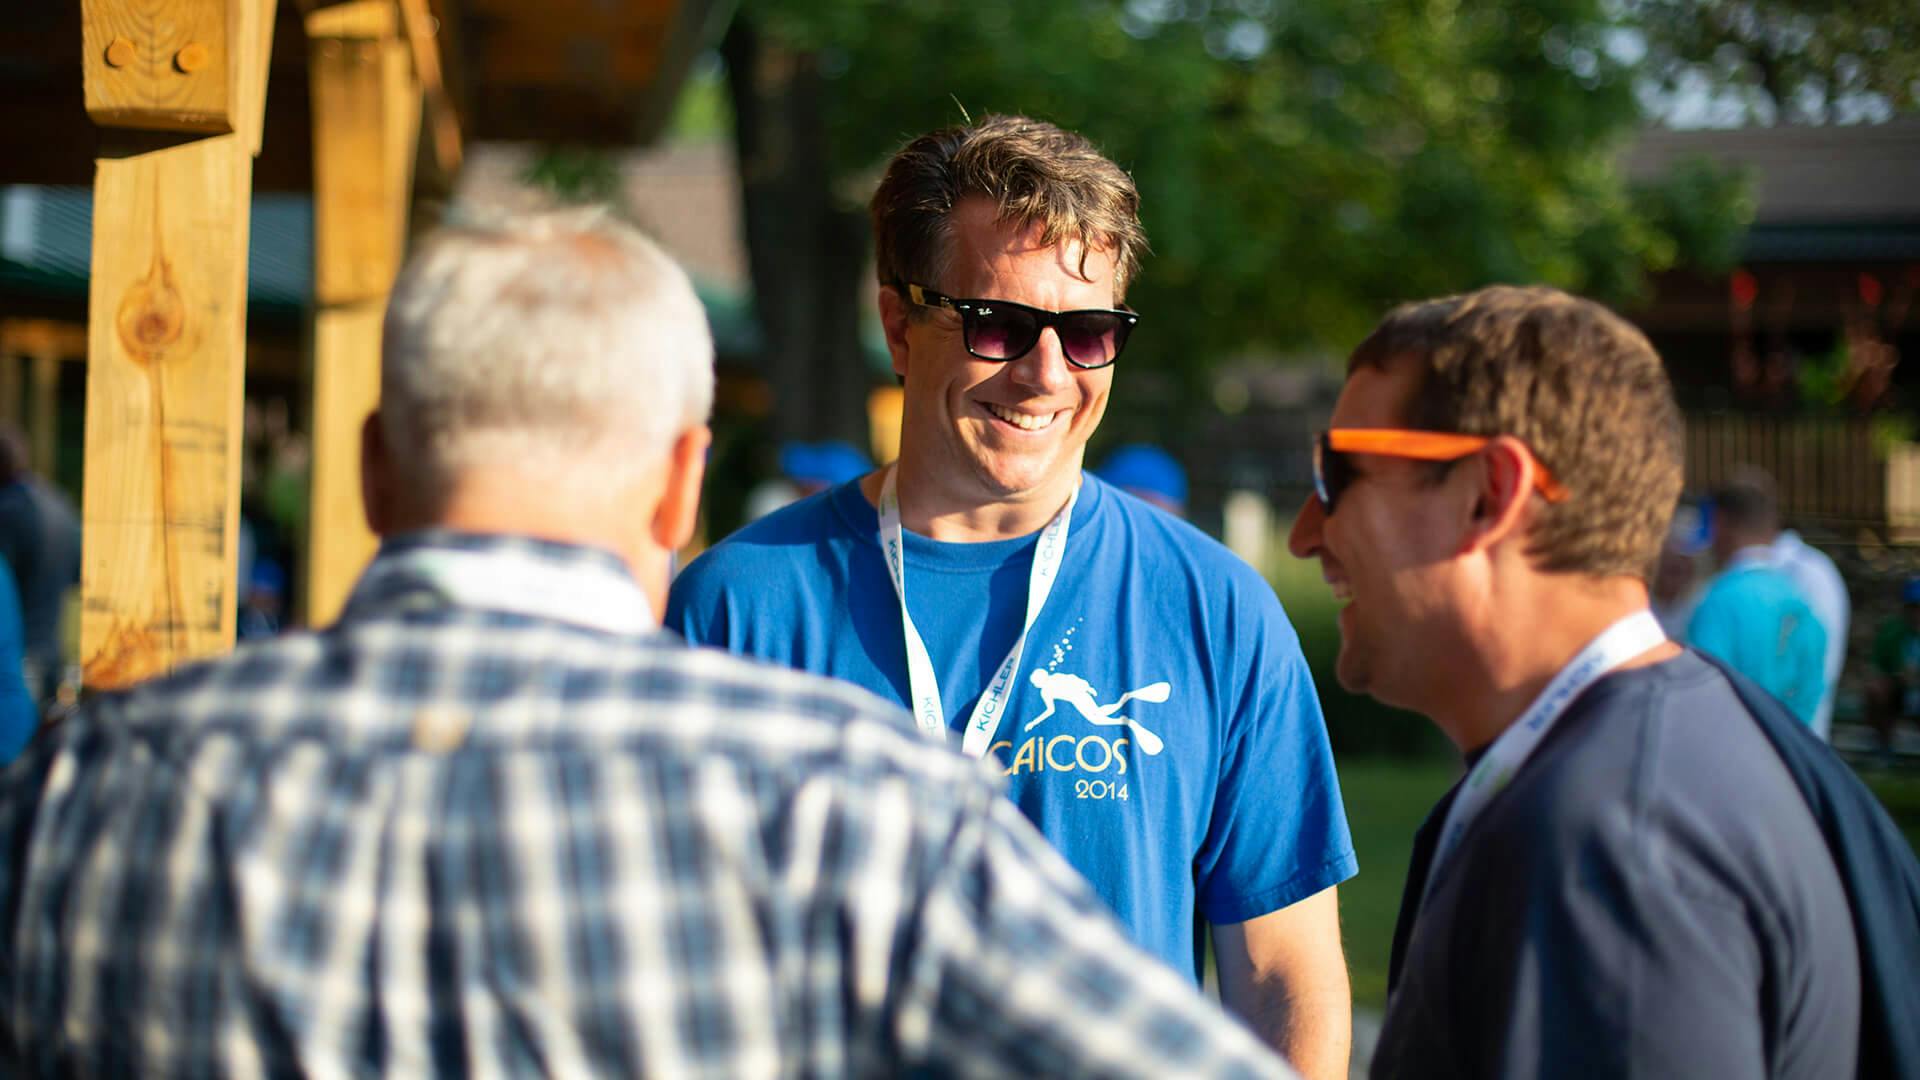 Three Light & Learn attendees smiling and conversing